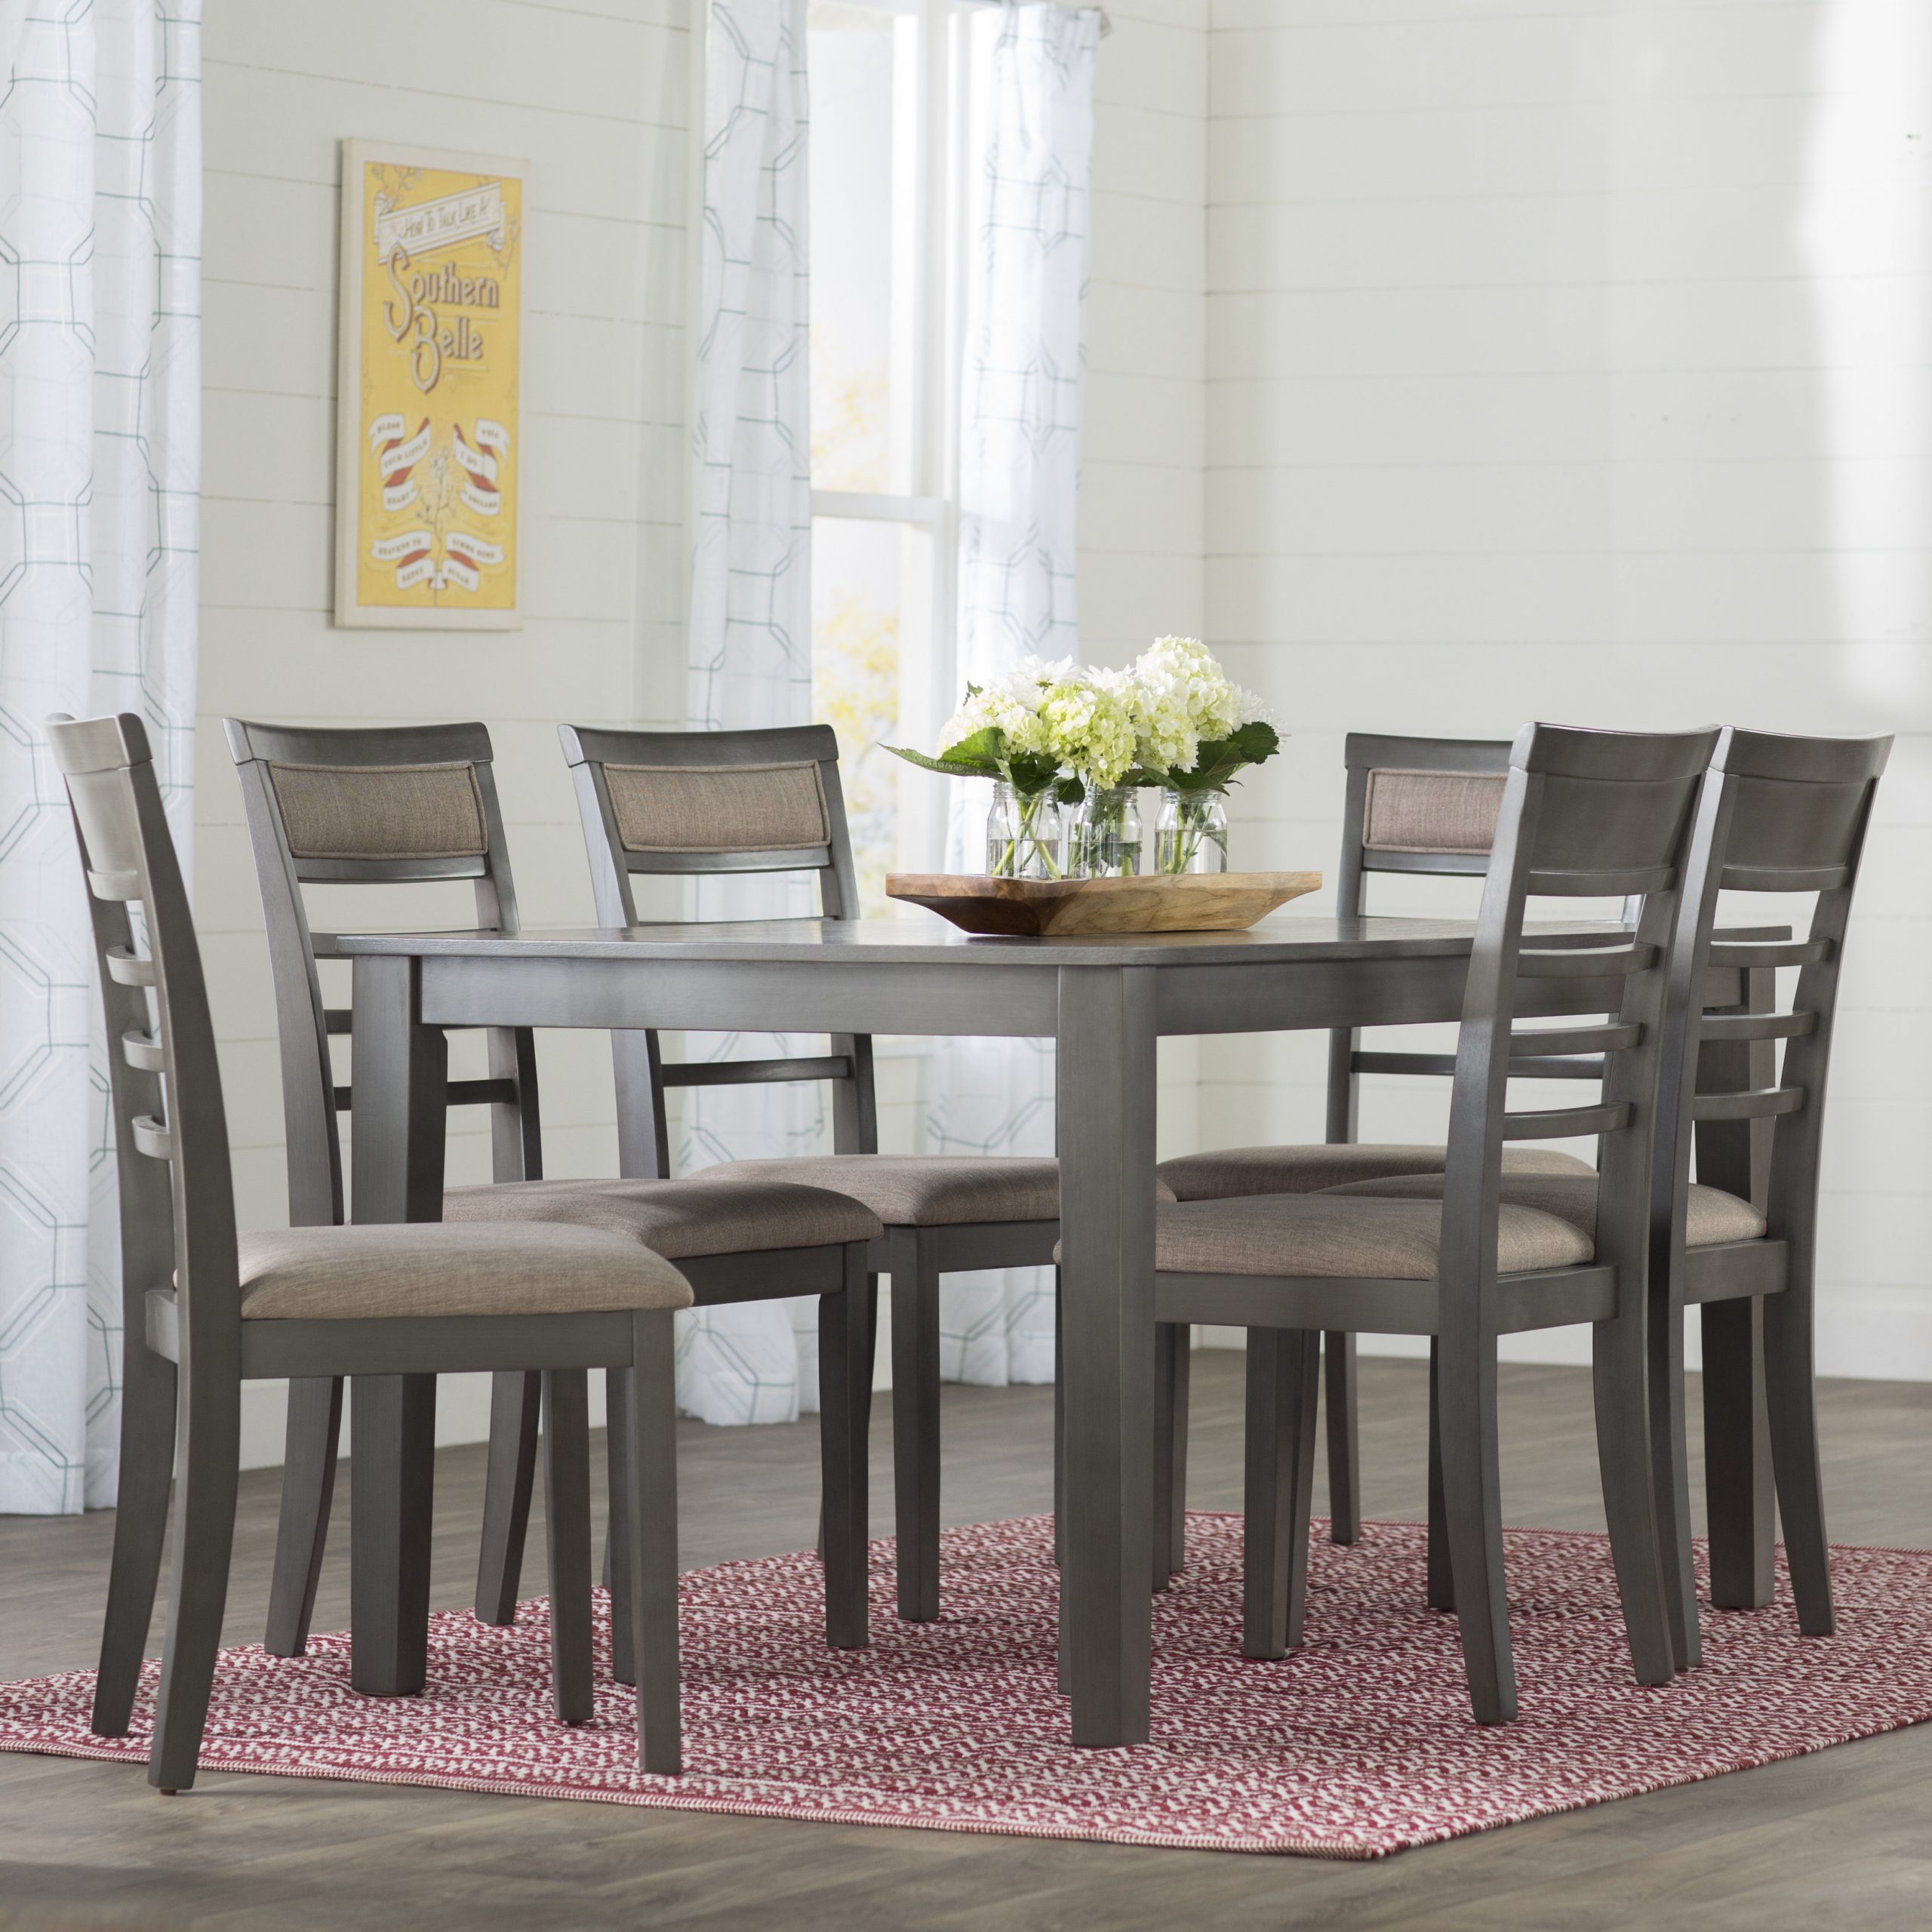 7 Piece Dining Room Set Under 200 House 500 1 000 2 pertaining to dimensions 3315 X 3315